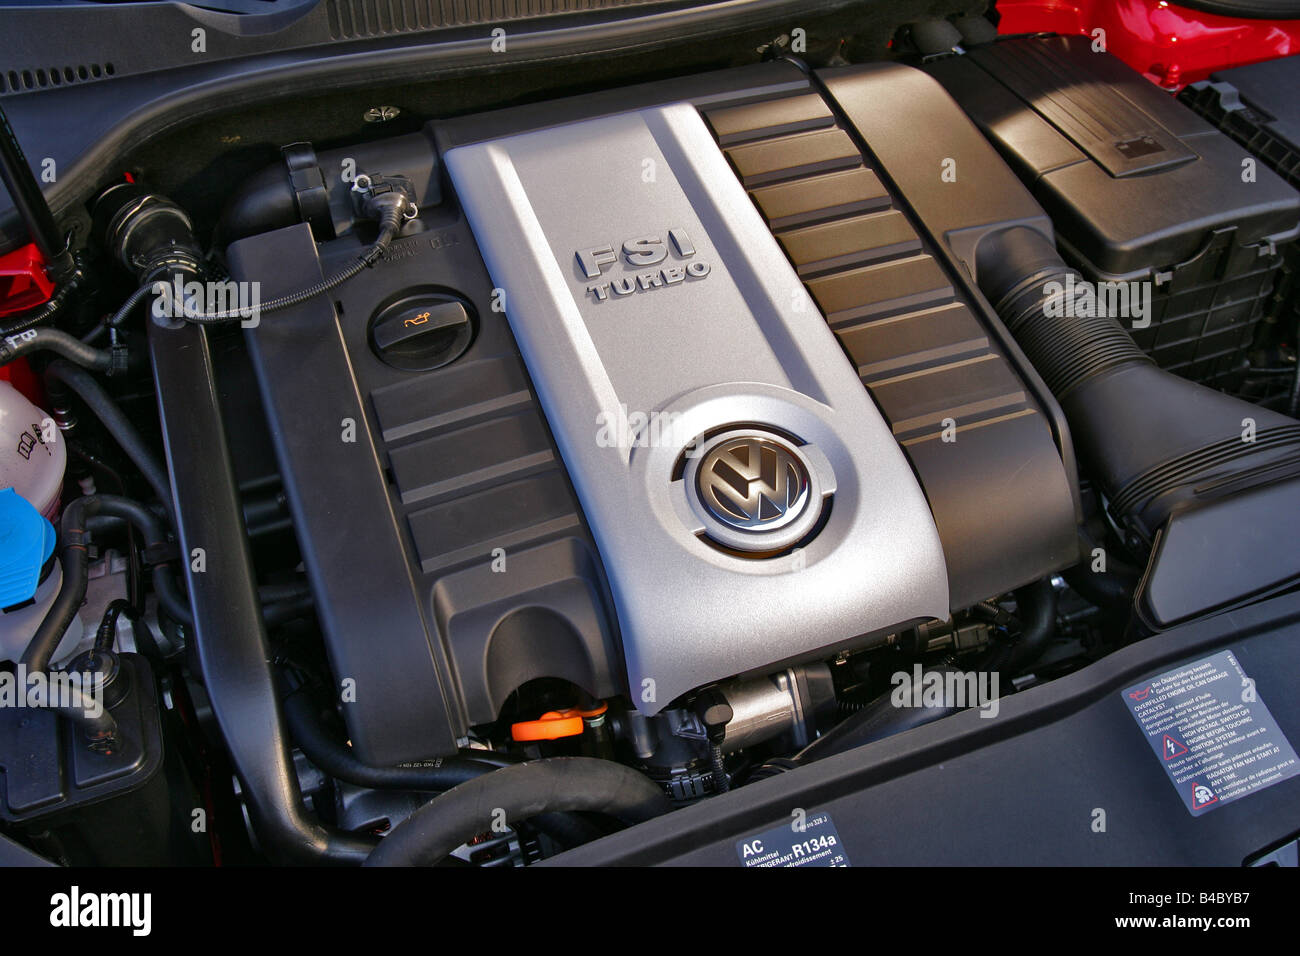 Volkswagen Engine Golf Car High Resolution Stock Photography And Images Alamy